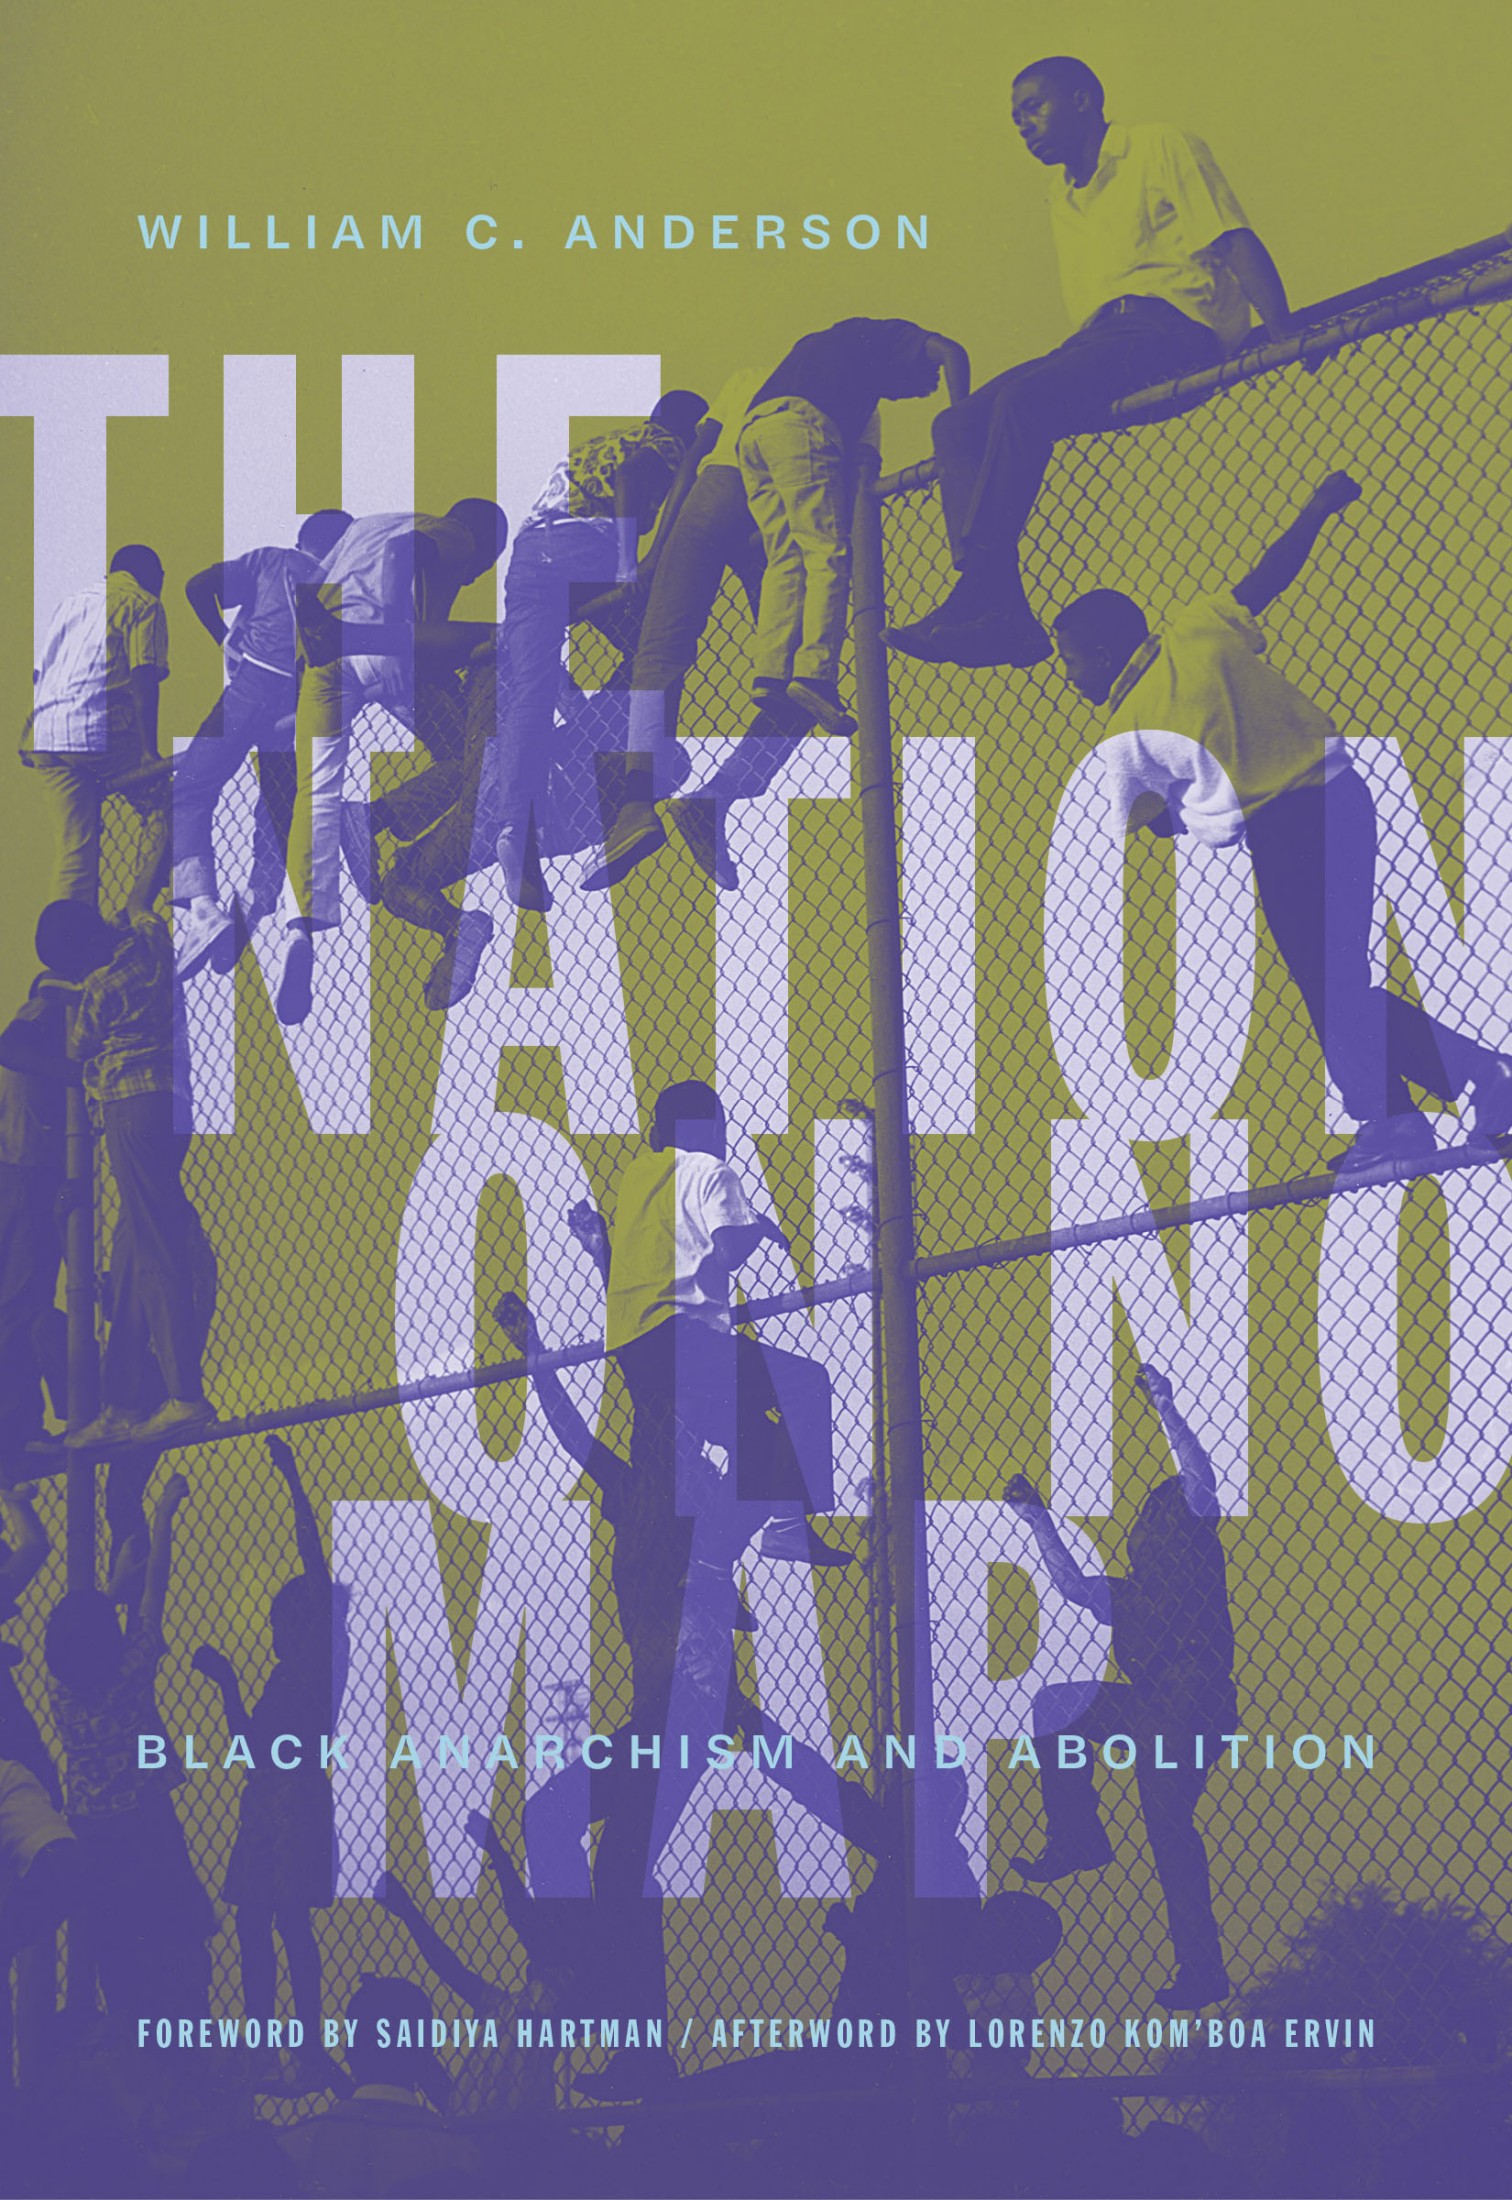 William C. Anderson: The Nation on No Map (EBook, 2021, AK Press)